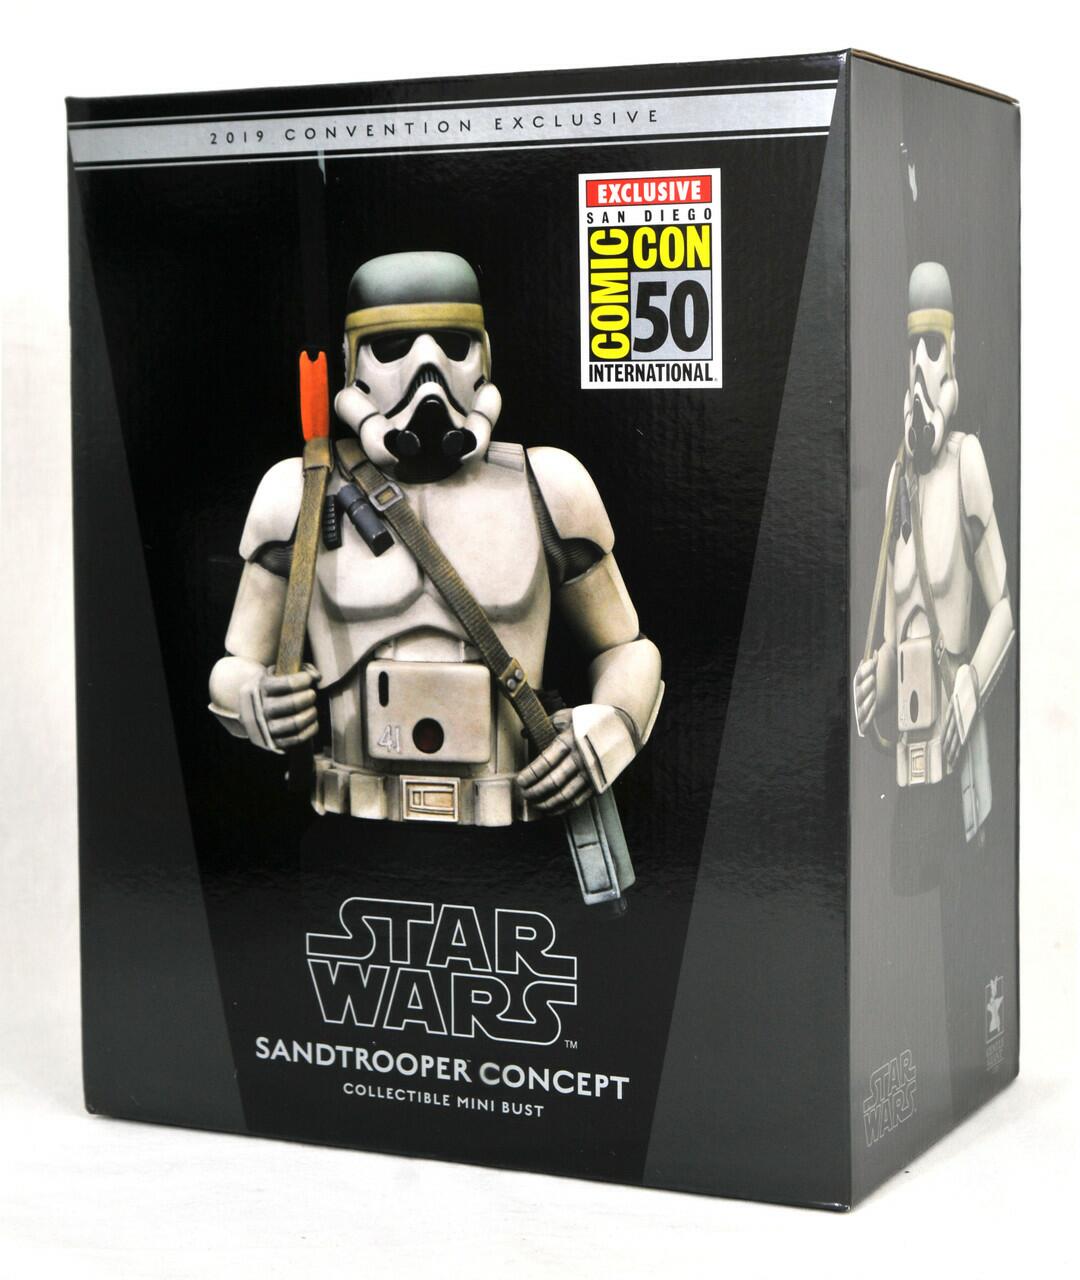 Gentle Giant - Star Wars A New Hope™ - Sandtrooper (Concept) Mini Bust - 2019 Convention Exclusive (83770)